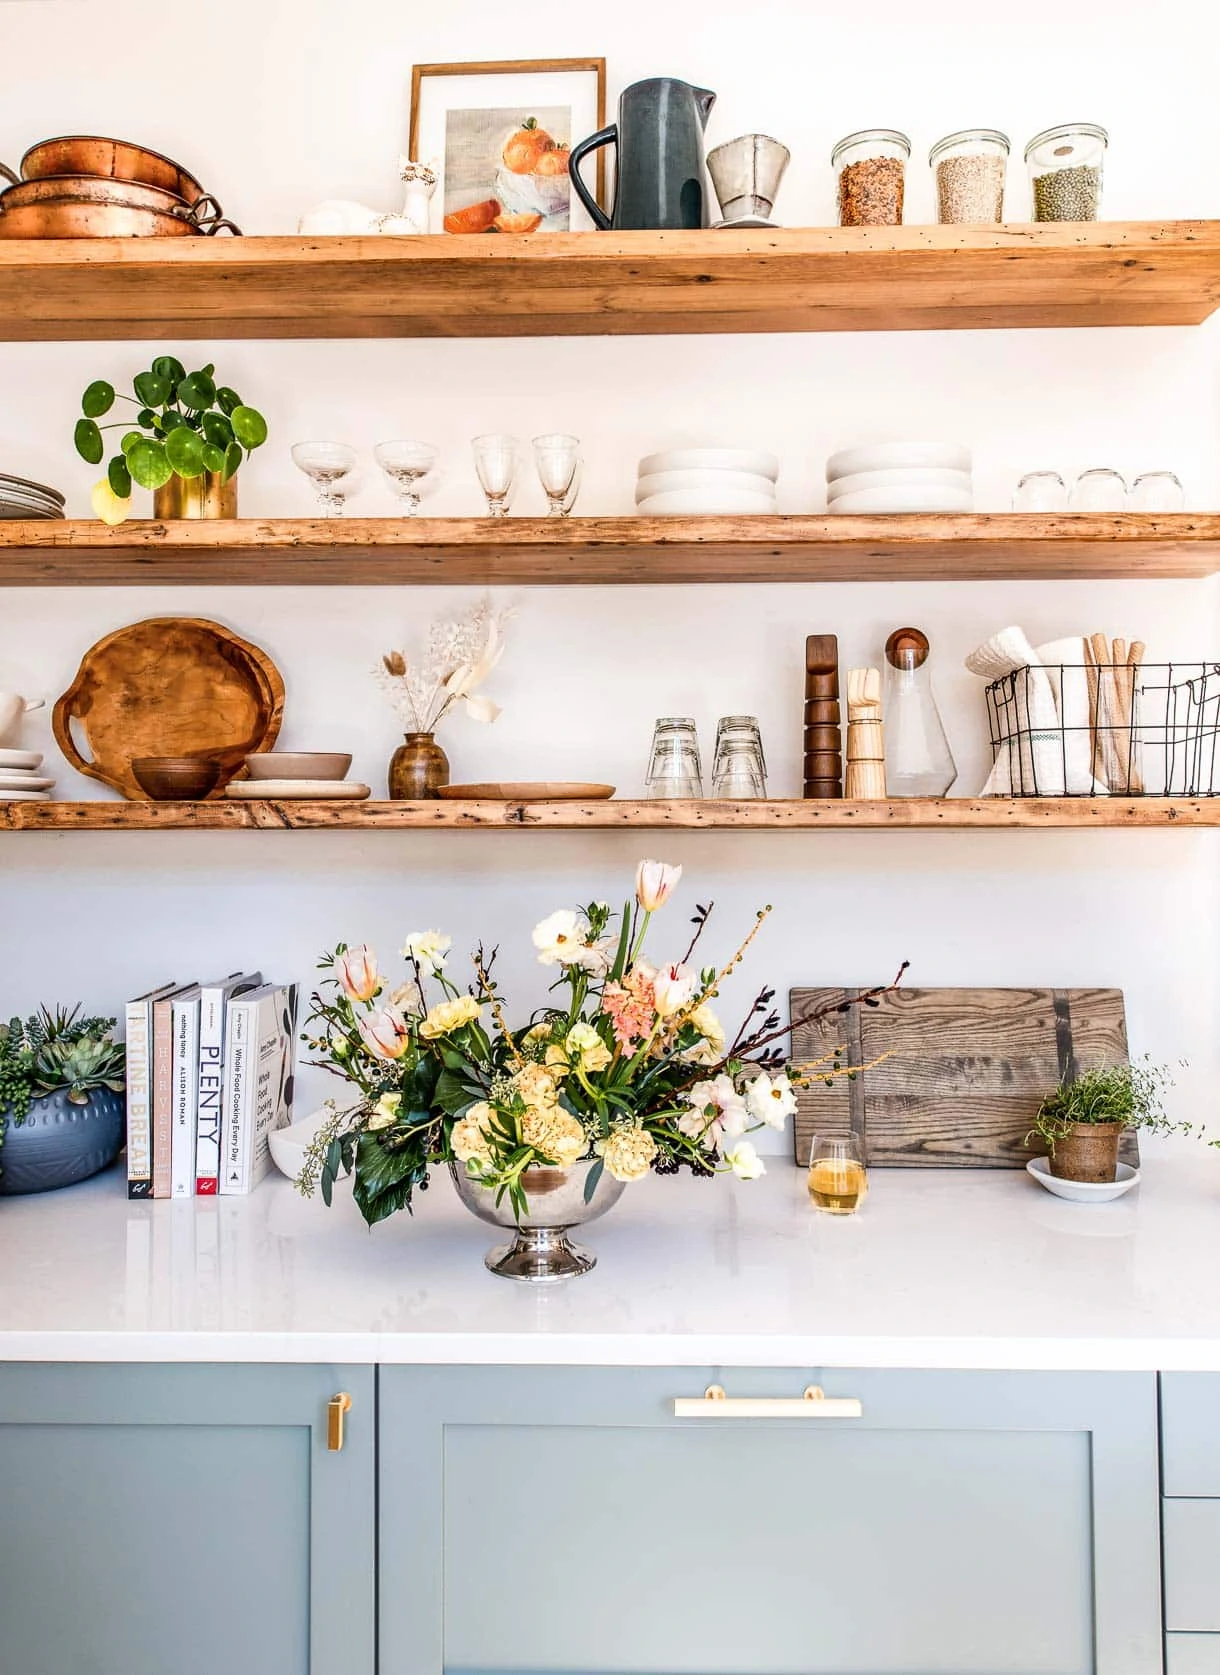 reclaimed wood shelving with florals and dining ware